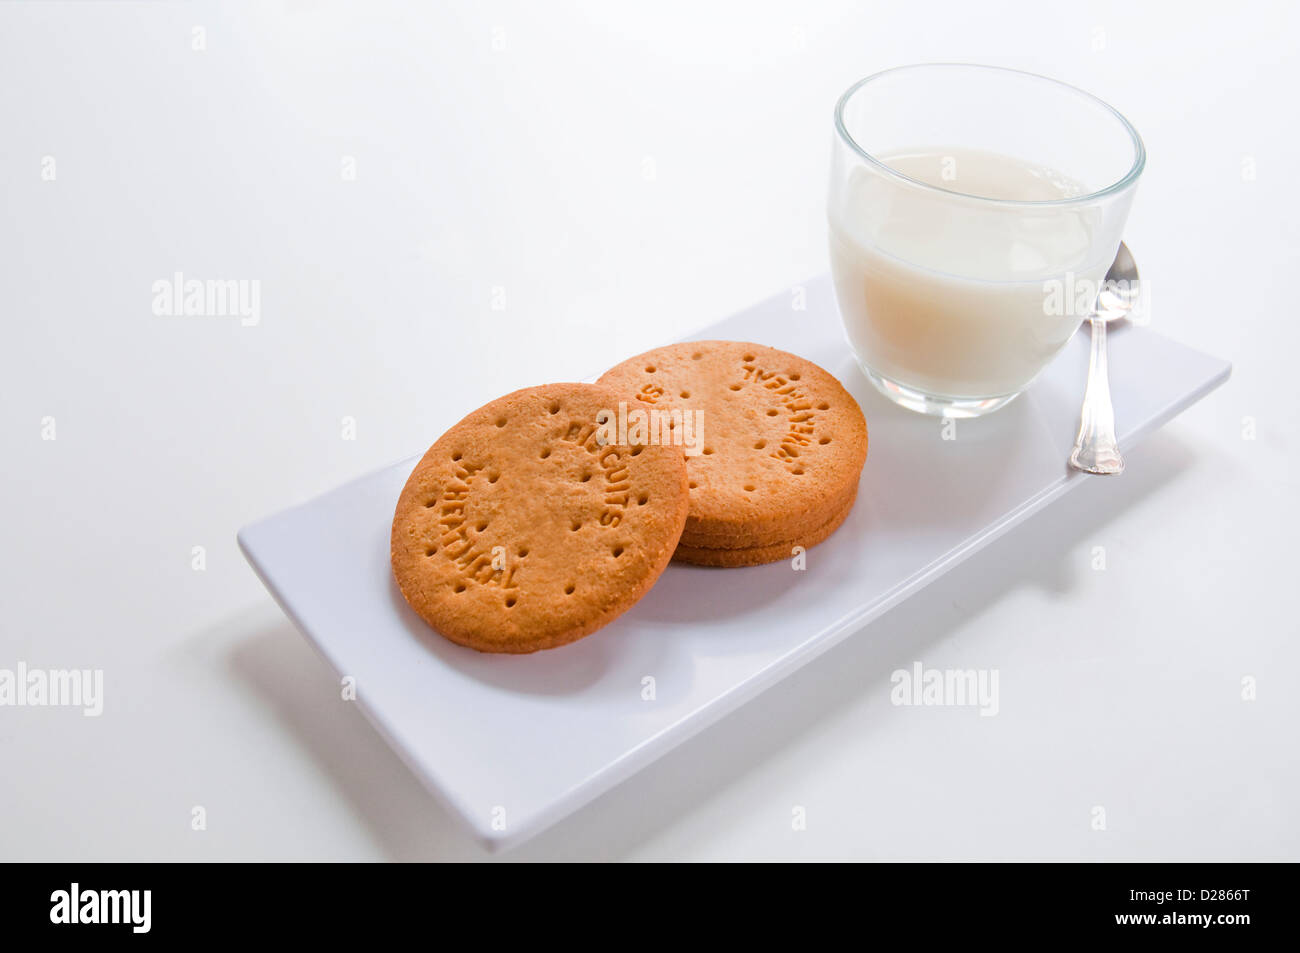 Wholemeal biscuits and glass of milk. Stock Photo